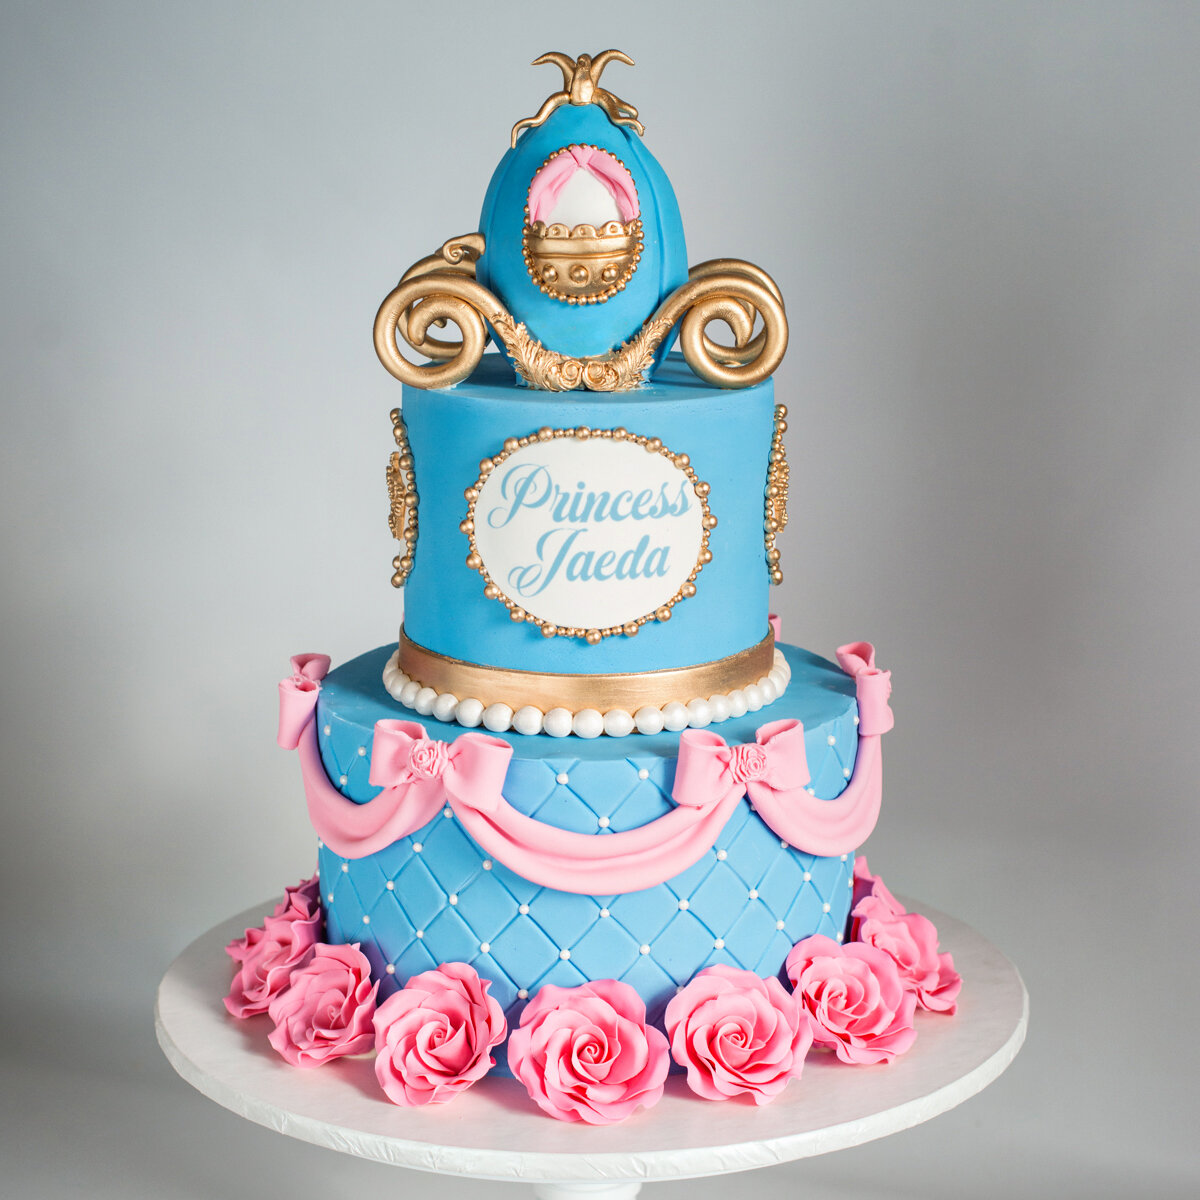 Bakers Oven Best Cake Delivery Shop in Gurgaon  Order Online Birthday  Cakes  Baking at its best